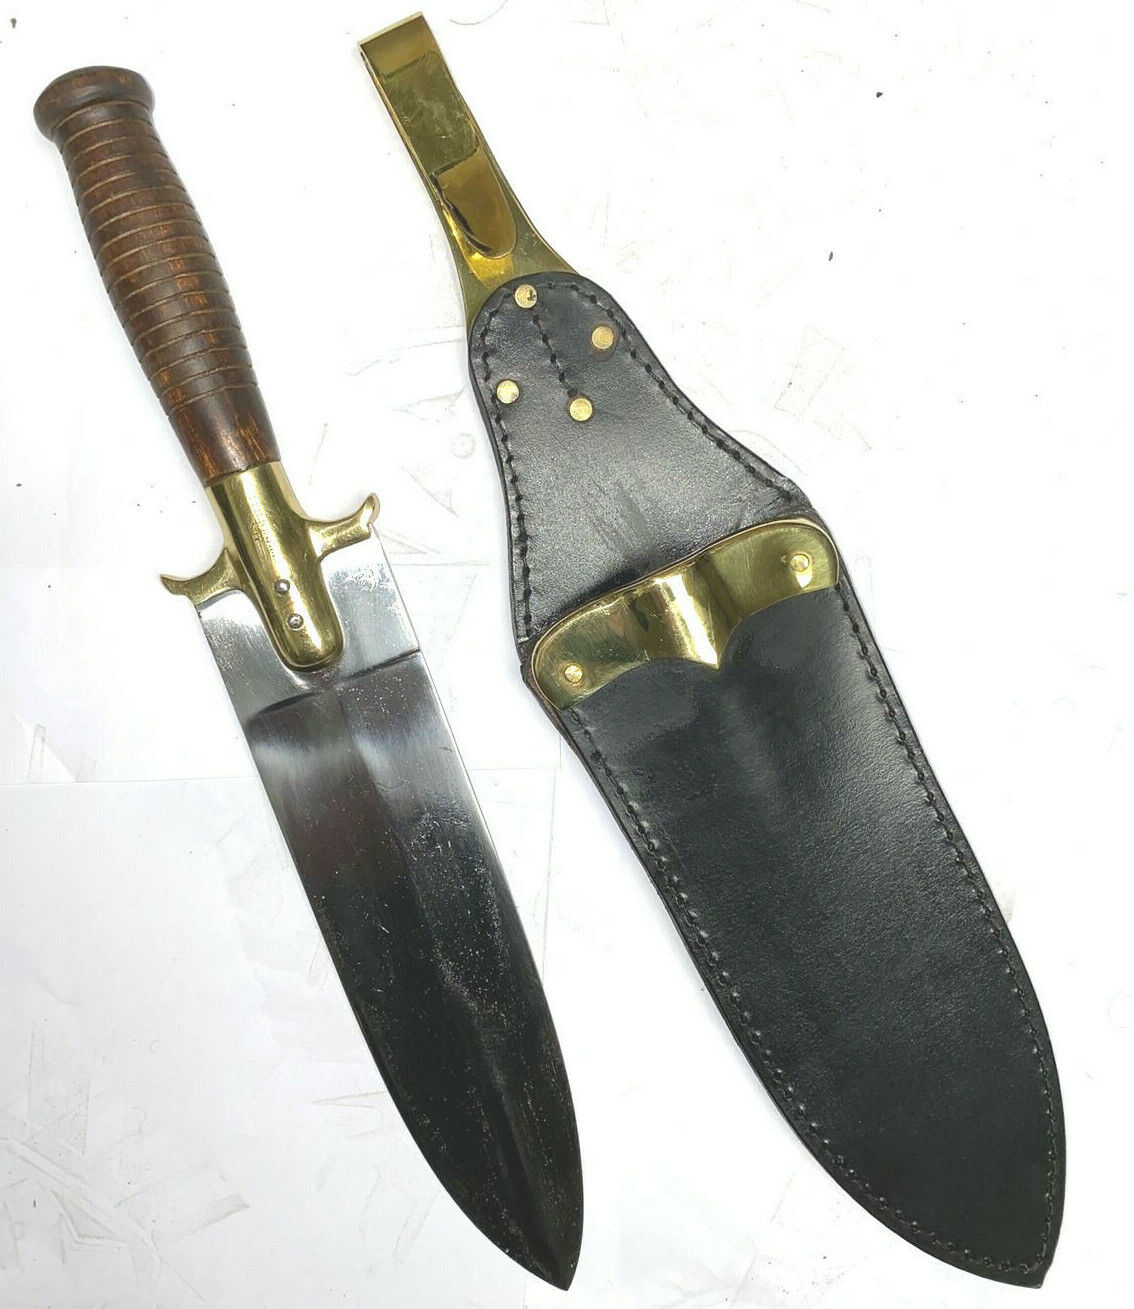 M1880 Hunting Implement with Leather Sheath - Reproduction 